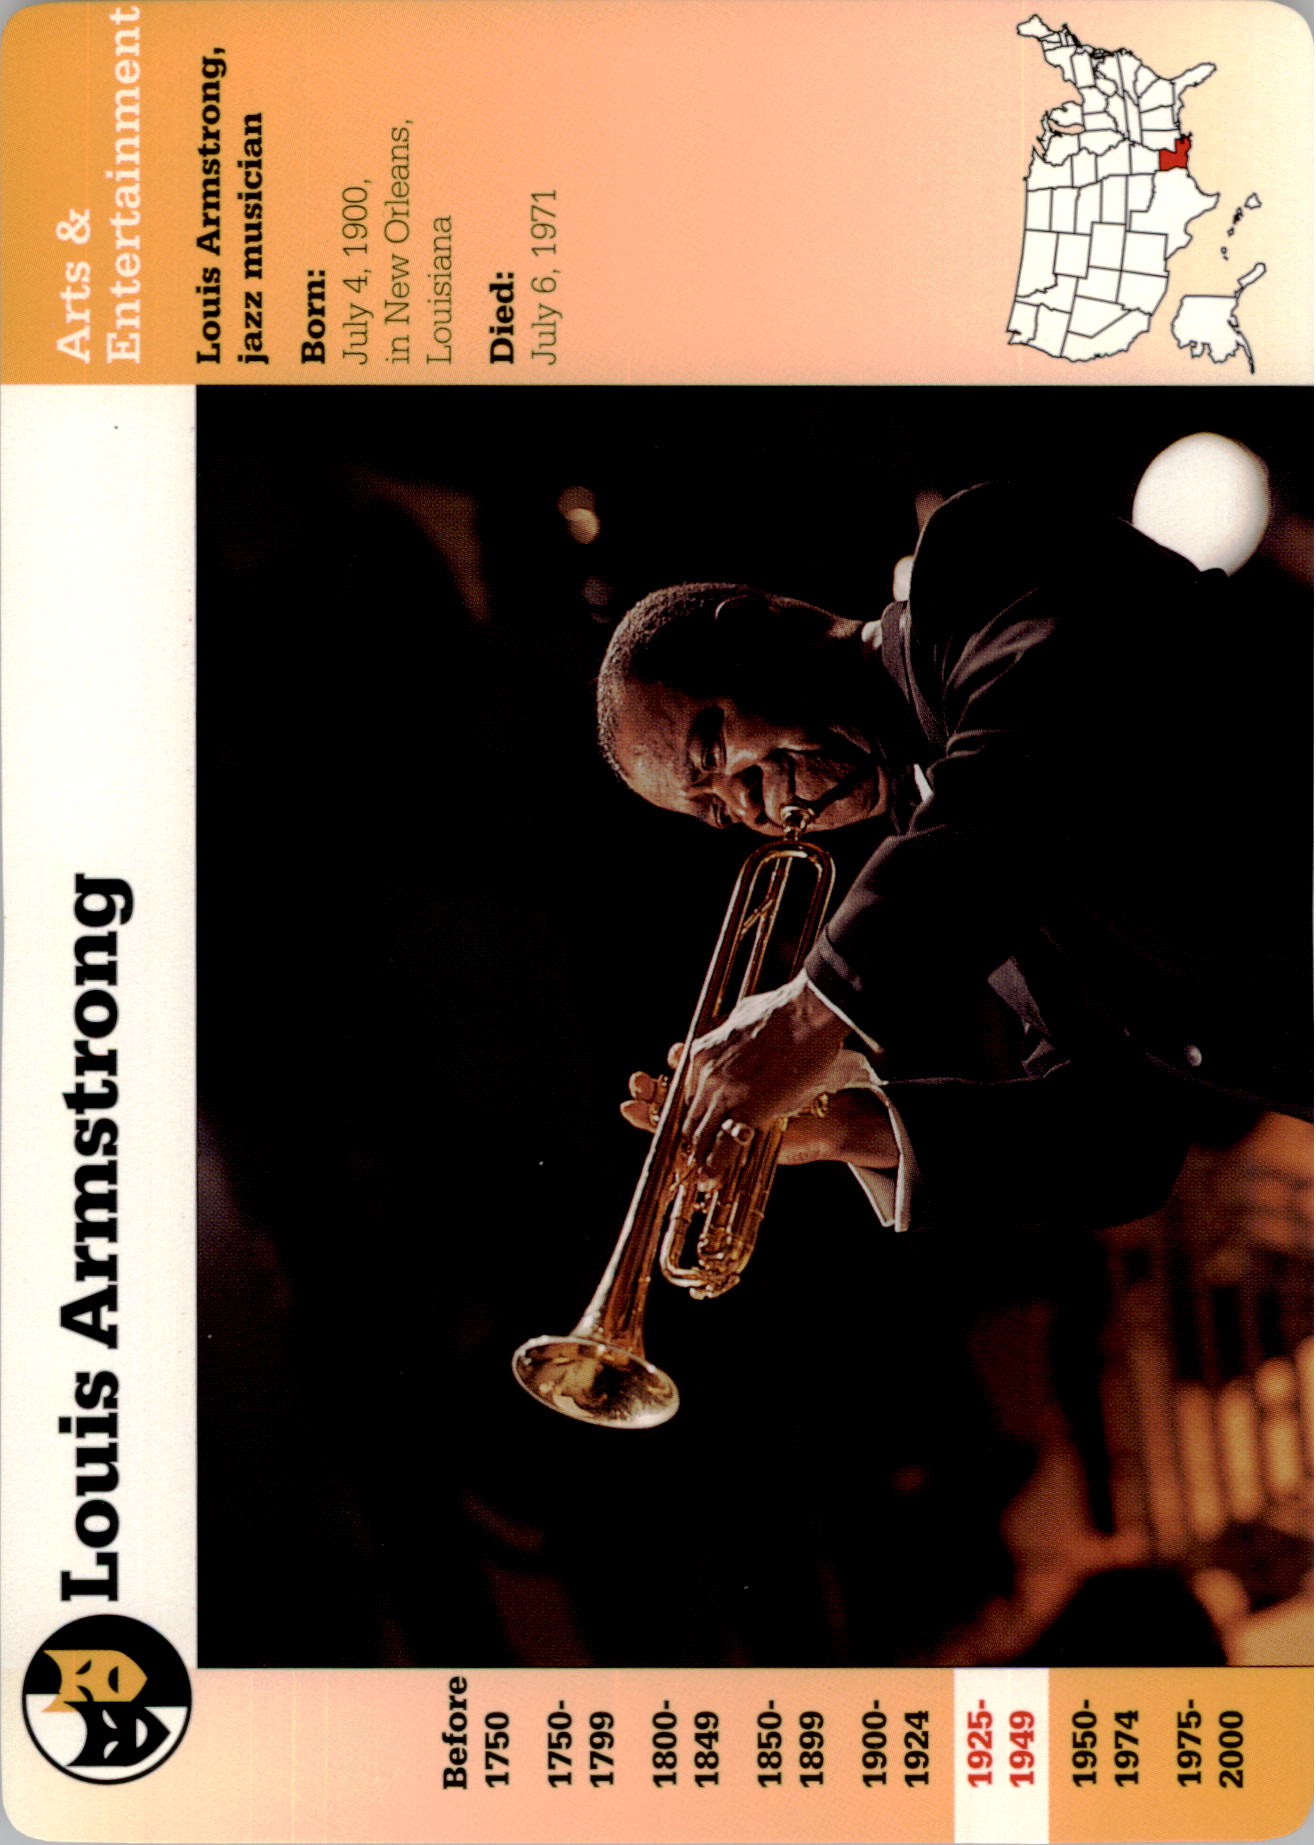  Louis Armstrong player image